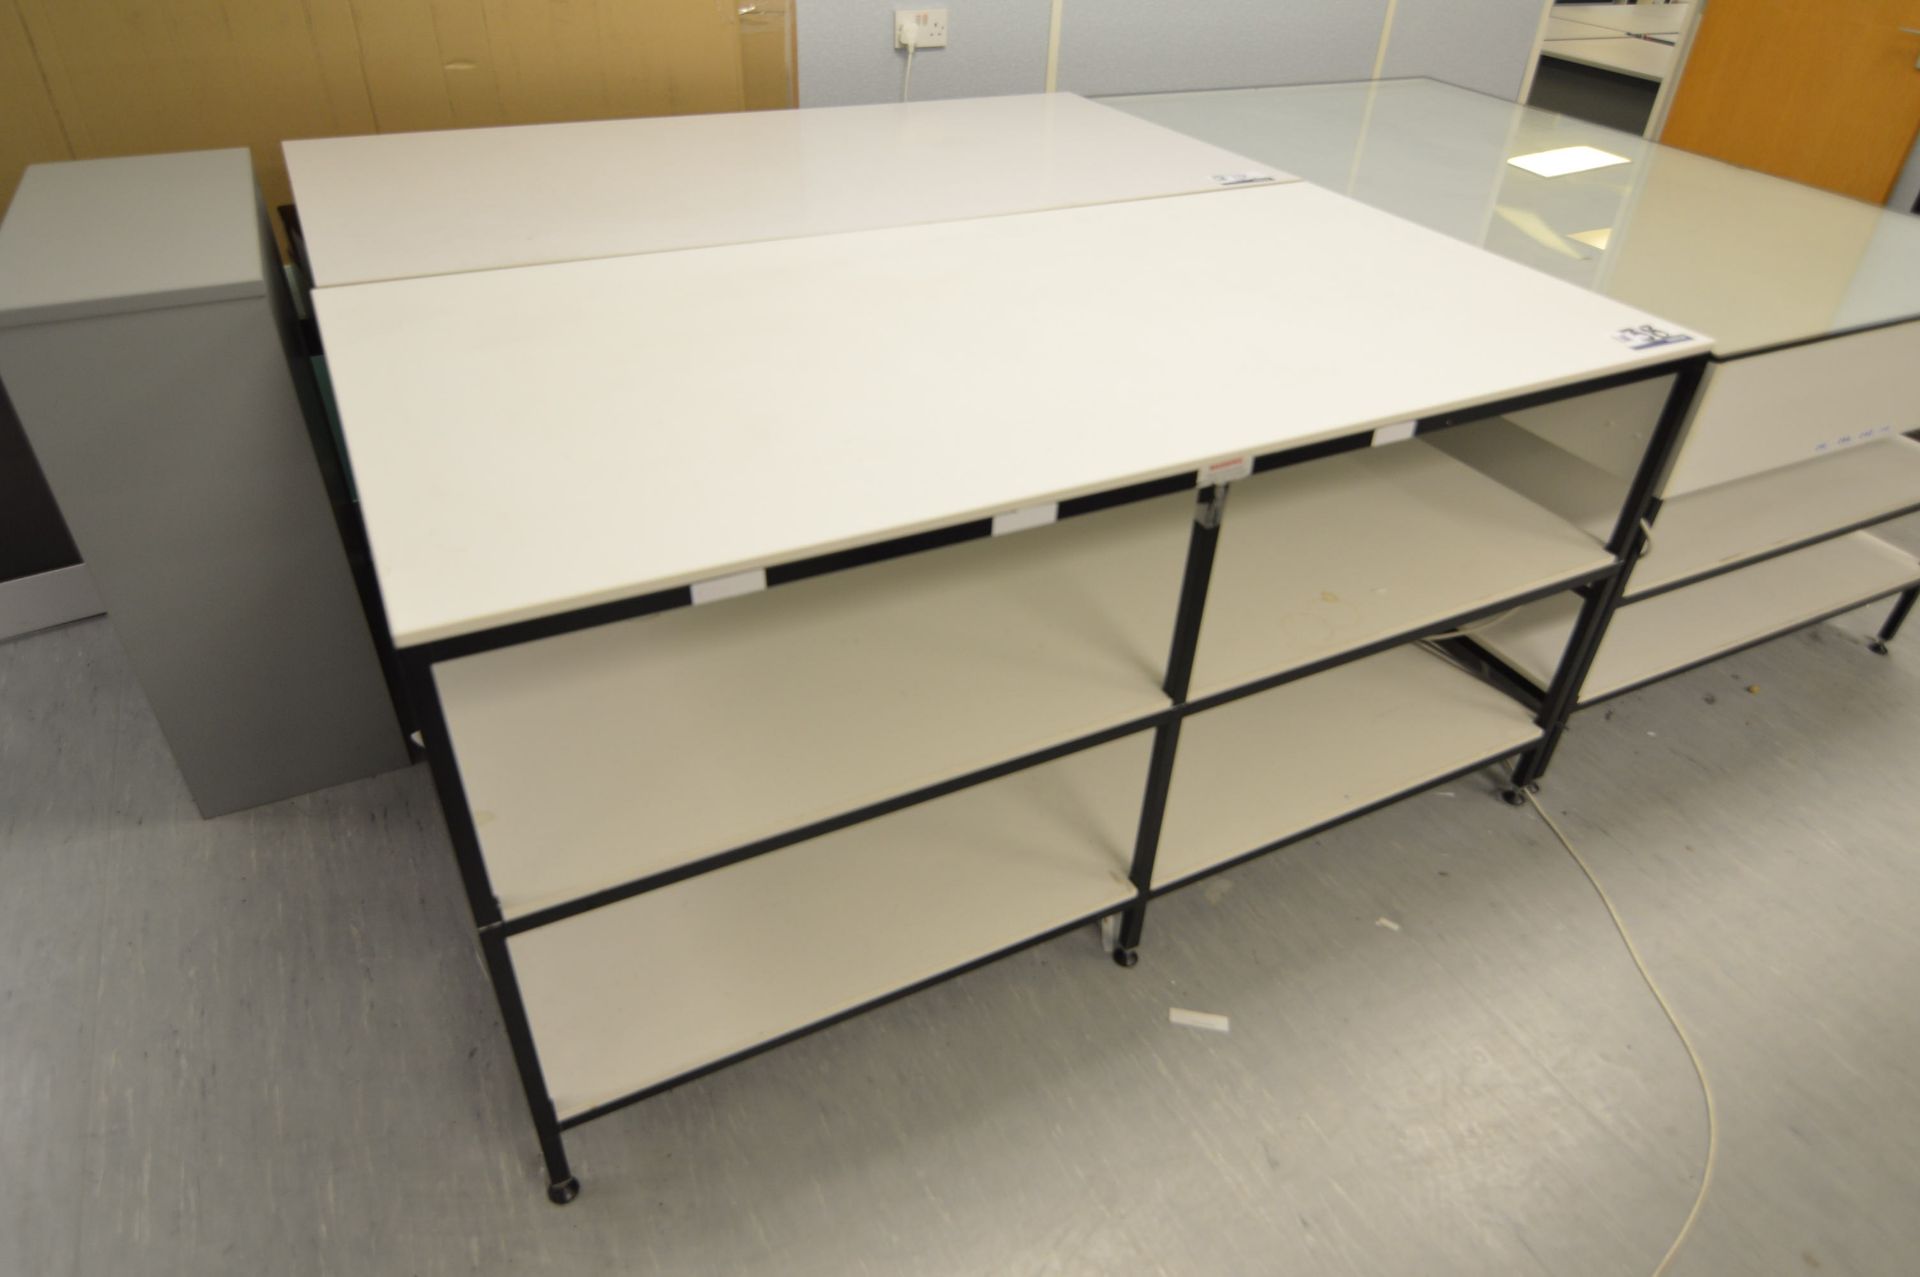 Two Steel Framed Worktables, each approx. 1820mm x 920mm